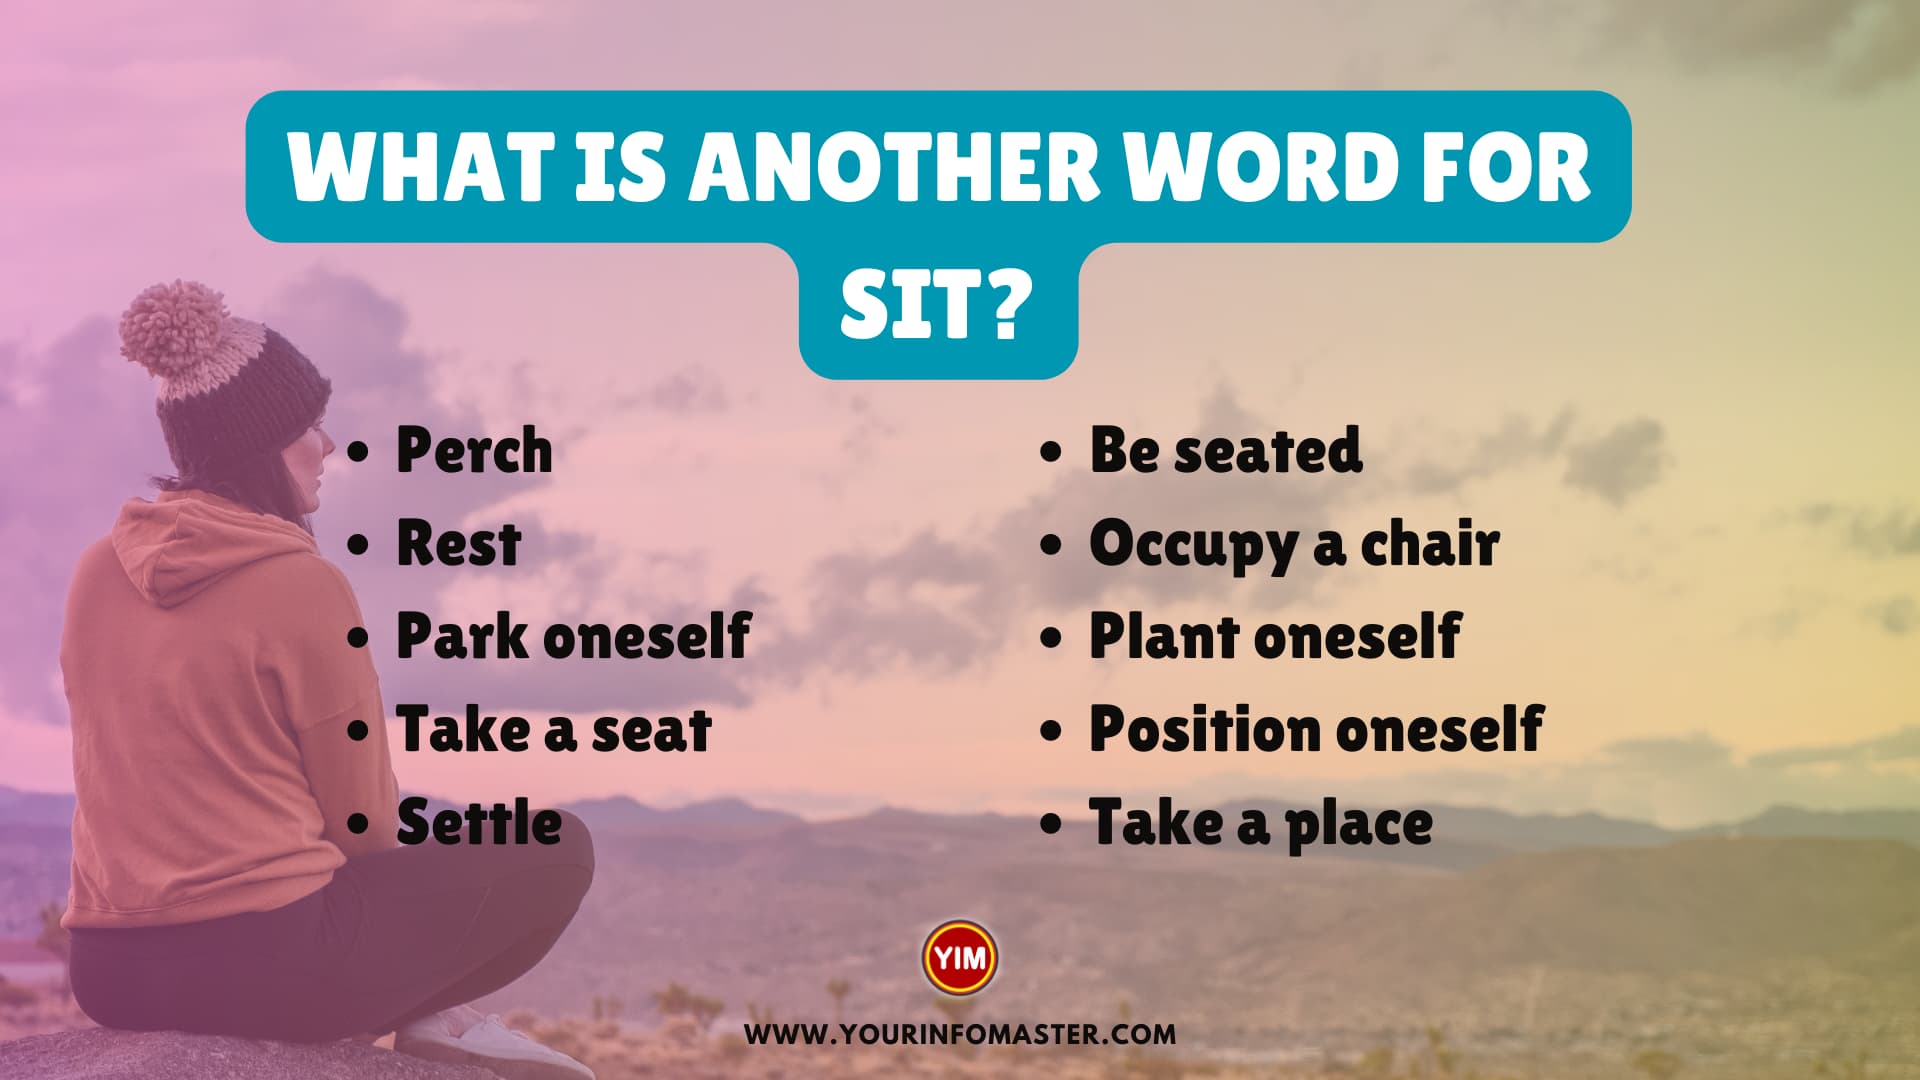 What is another word for Sit